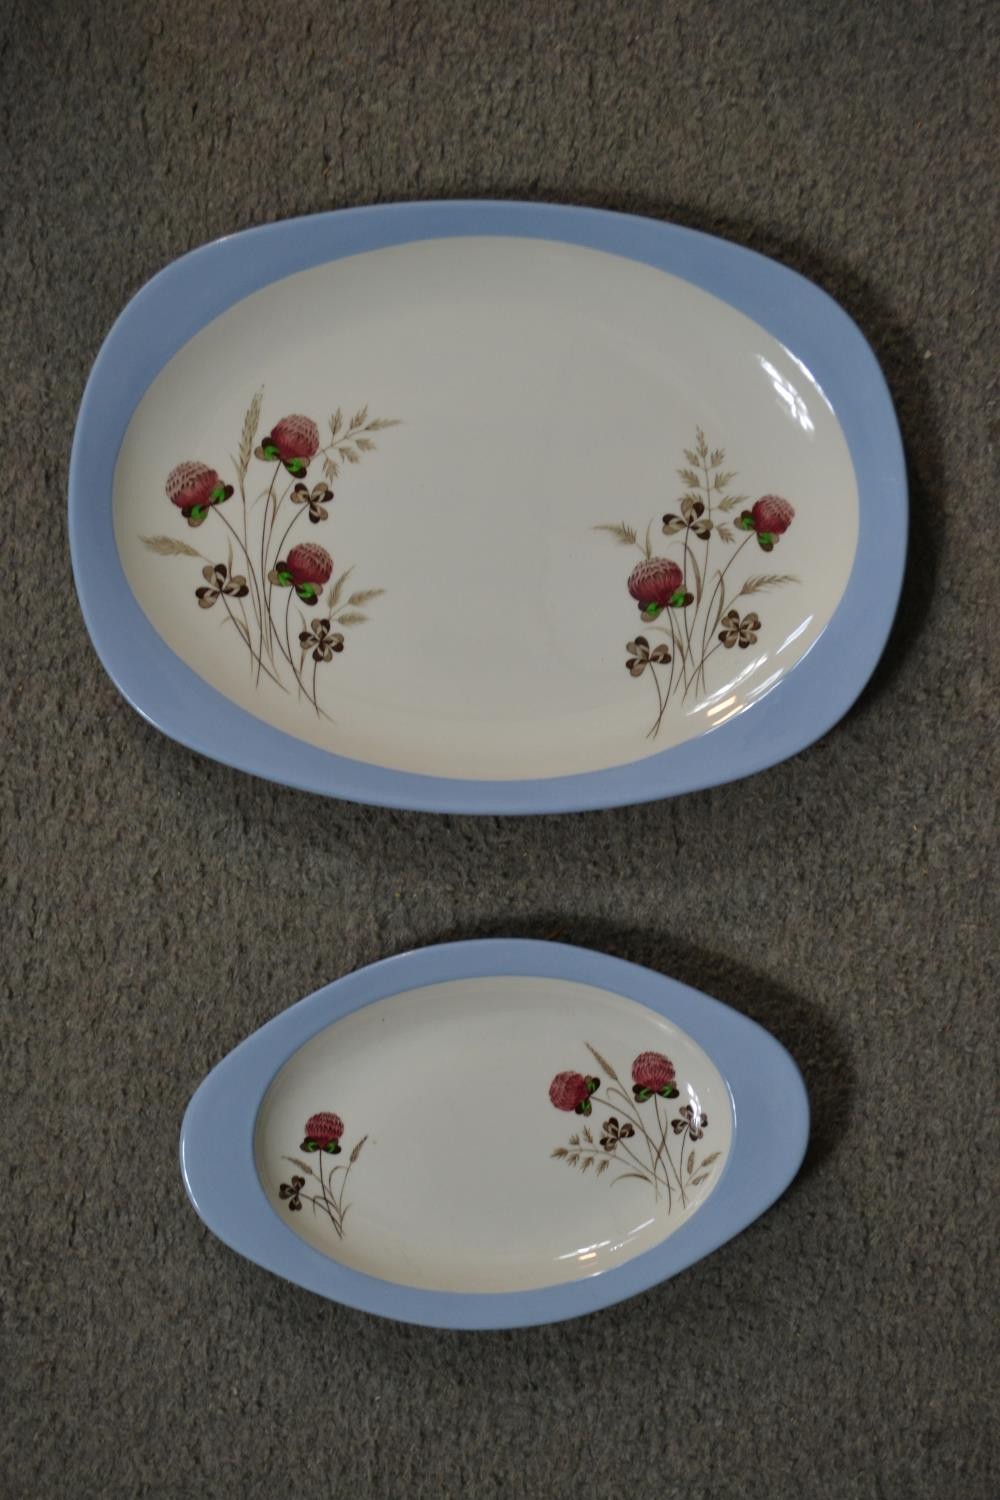 A 20th century Copeland Spode dinner and tea set, 55 Pieces, with clover and other flowers, in a - Image 4 of 8